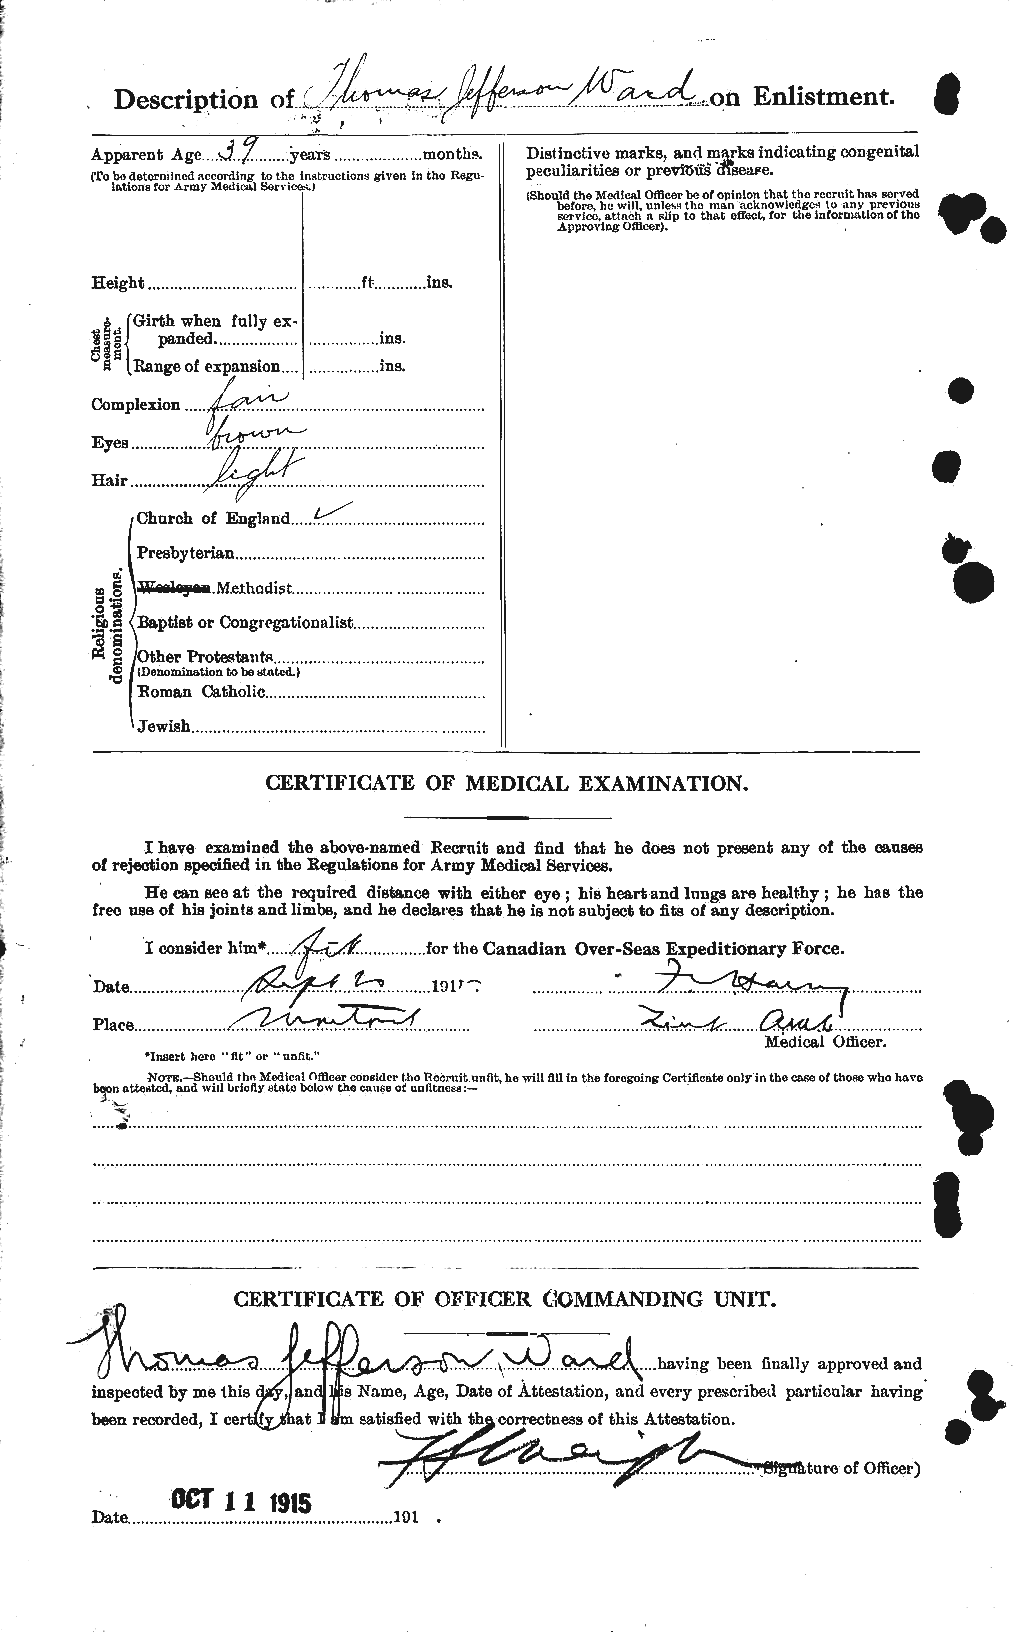 Personnel Records of the First World War - CEF 659729b